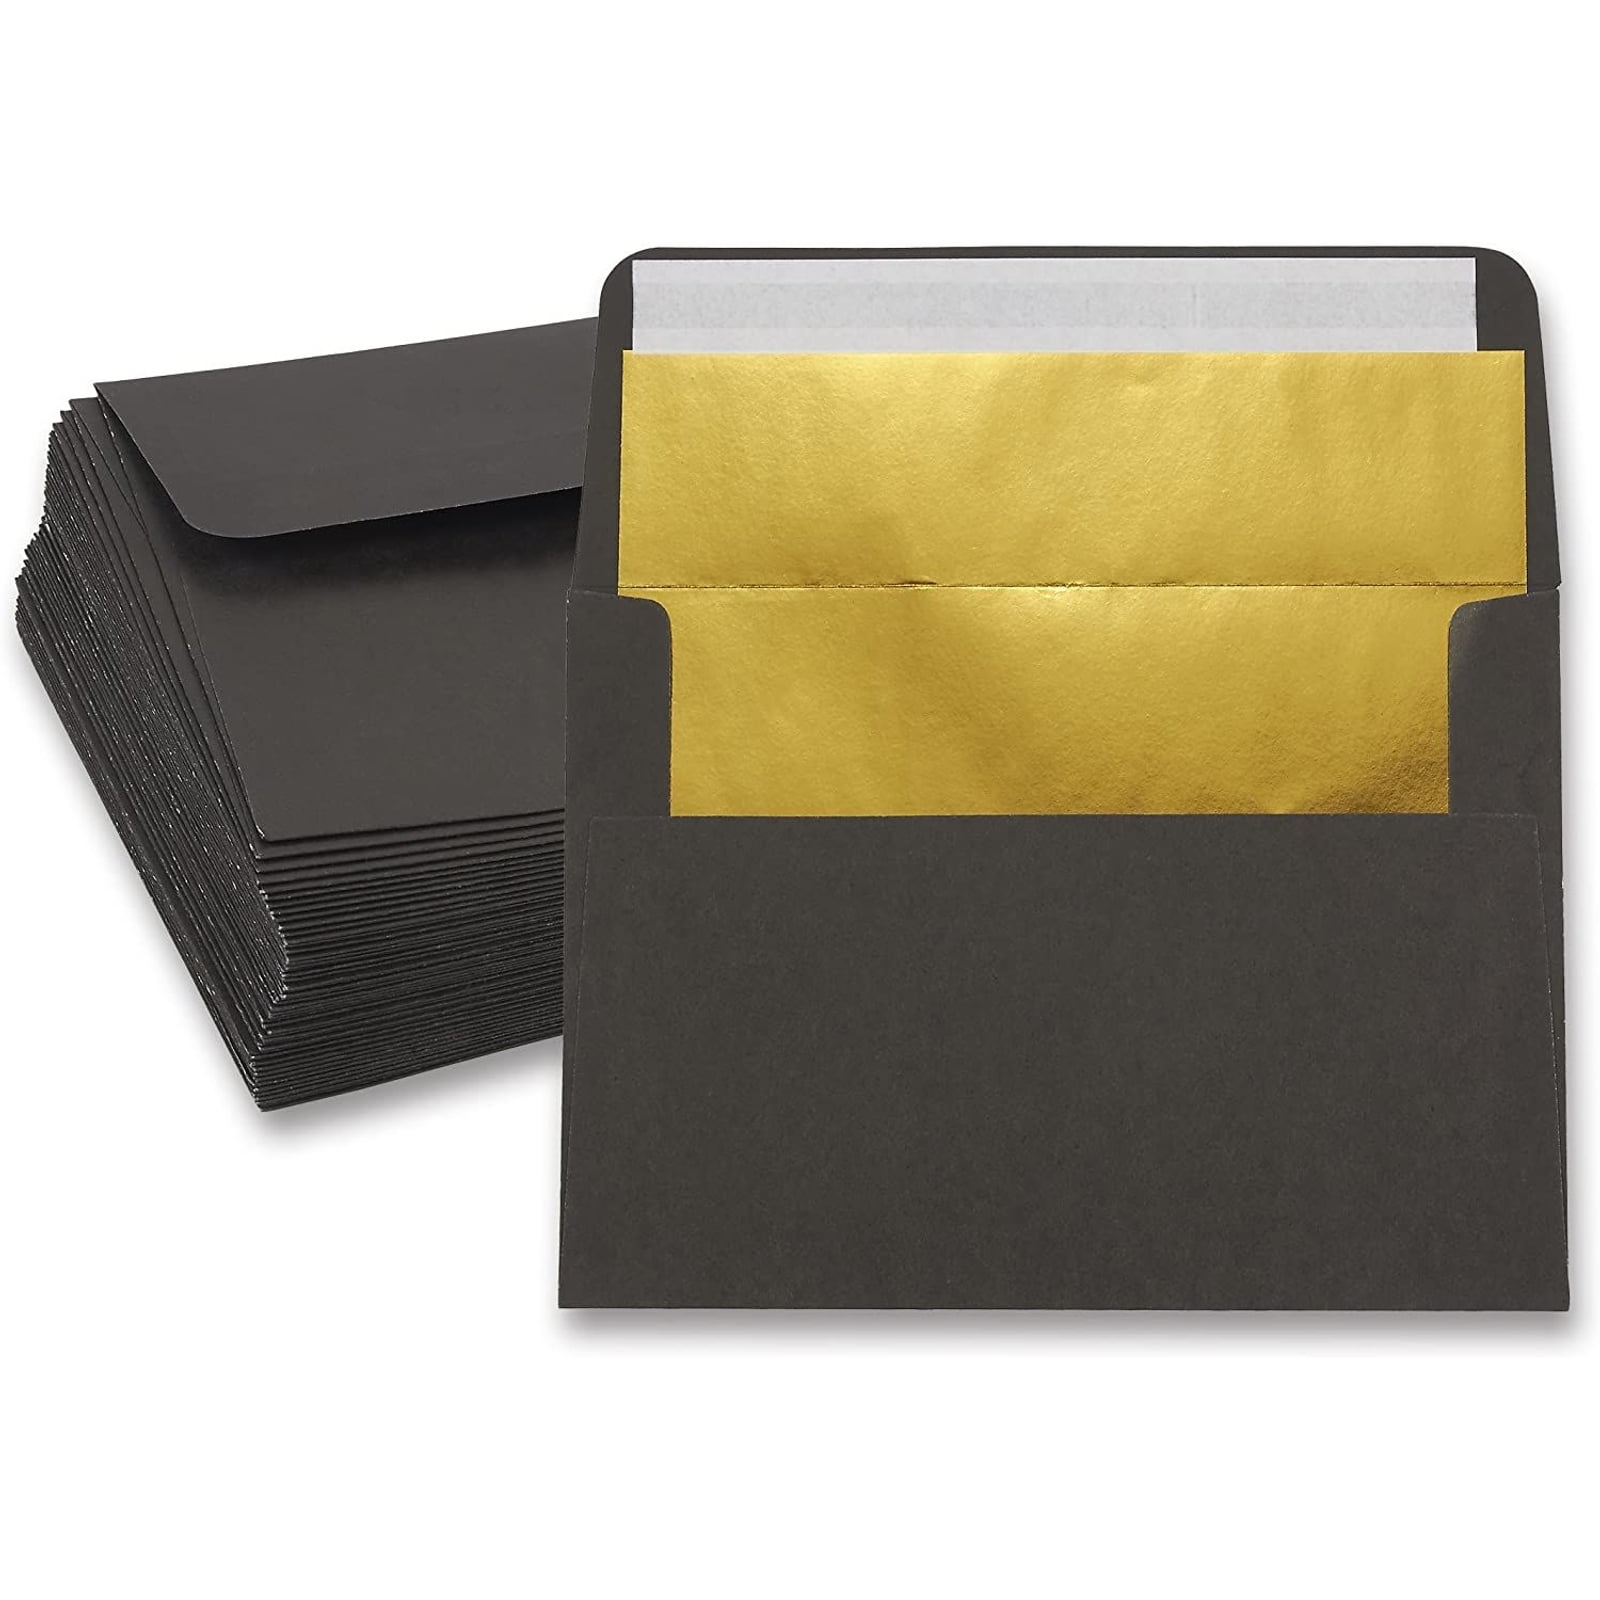 A7 Black Envelopes 5 x 7,50Pack, for 5x7 Cards Perfect for Photos, Self Seal 